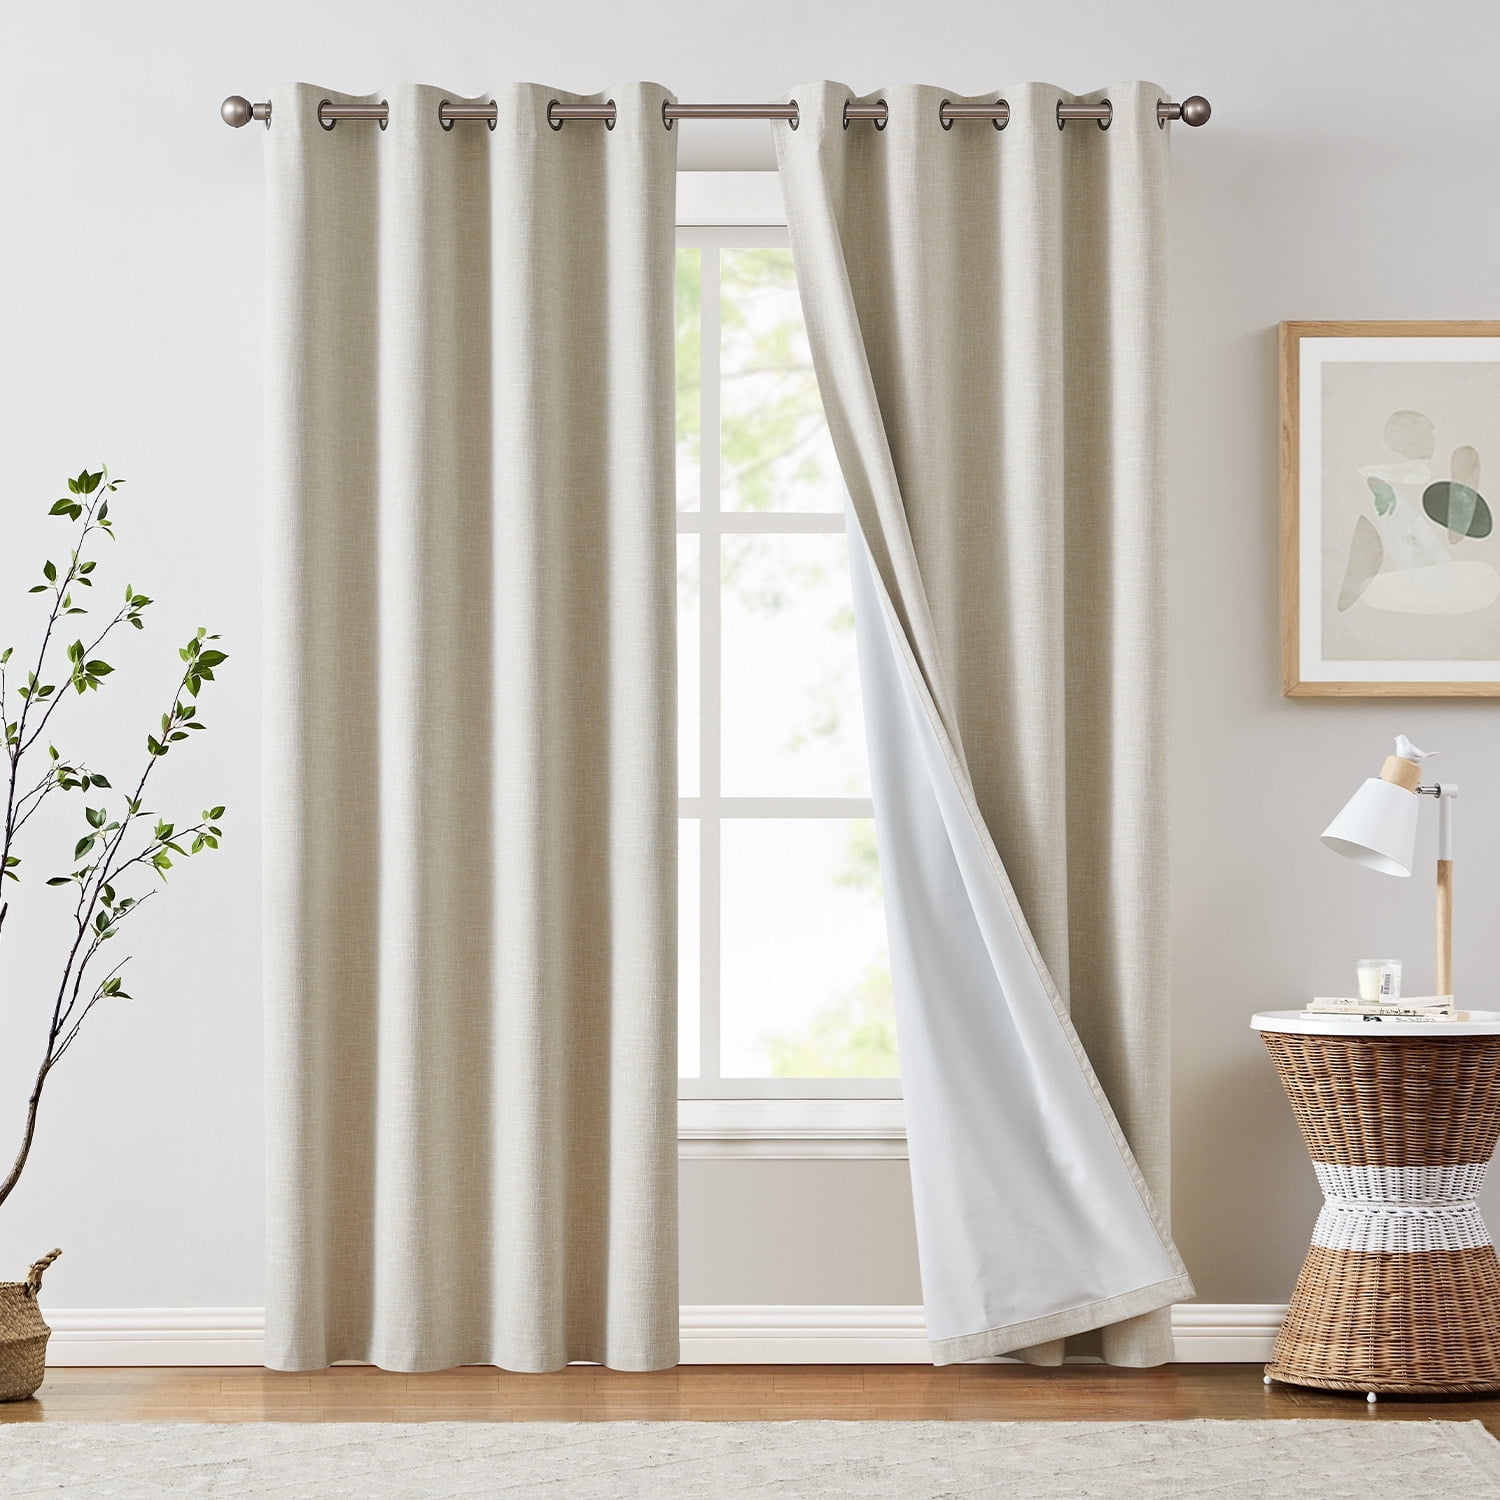 Curtainking Damask Printed Curtains for Bedroom Living Room Vintage Linen  Textured Thermal Insulated Curtains Grommet 2 Panels 54 inch Length Taupe  on Greyish Beige 